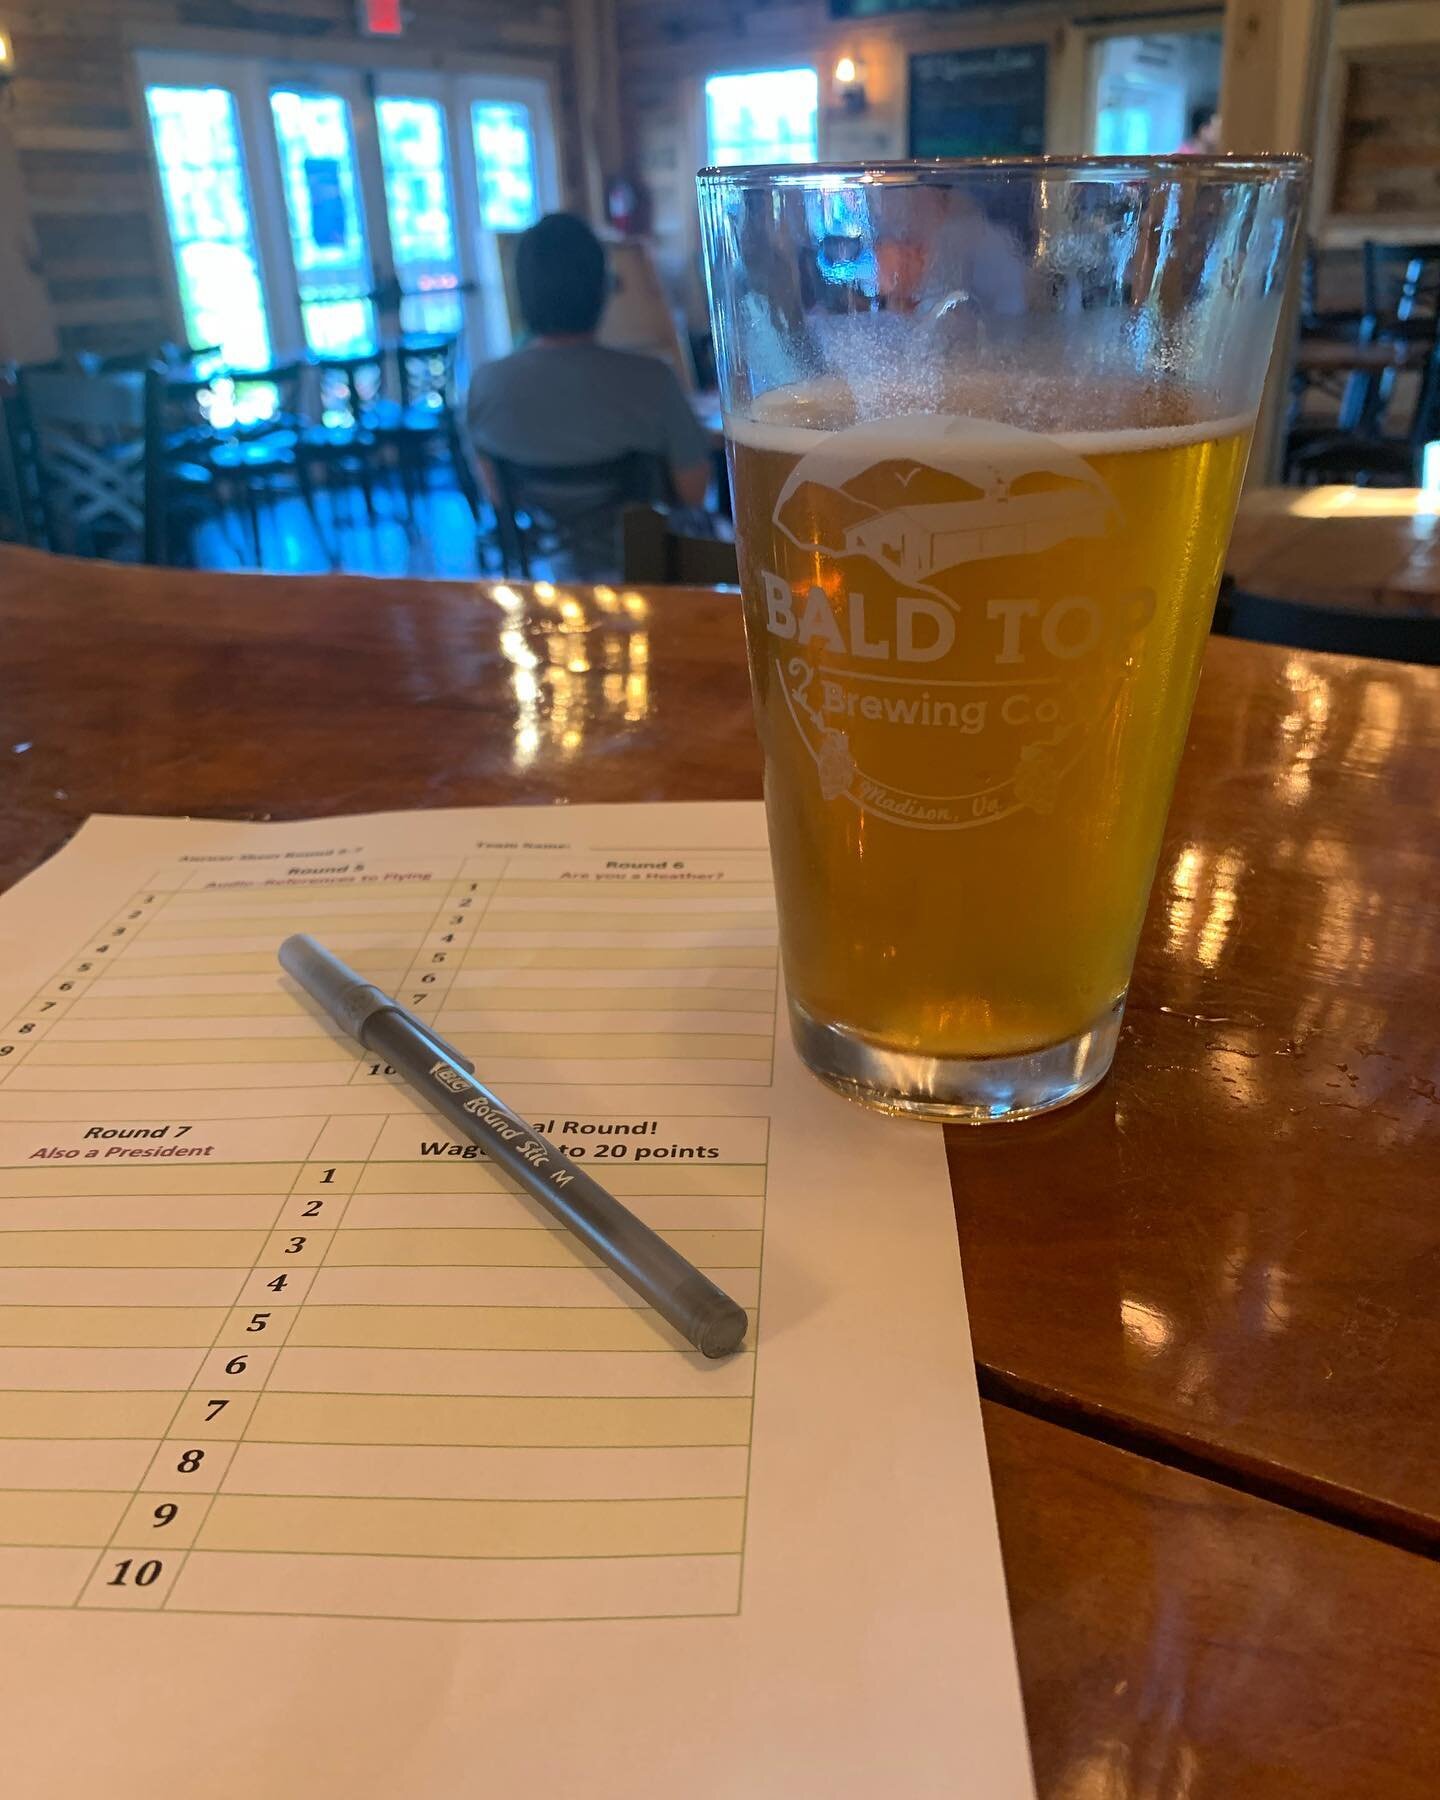 Tunes and Trivia starts at 6:30 tonight! Jared from @bluecutmedia is hosting, come on out and enjoy the first day of September!
&bull;
&bull;
&bull;
#baldtop #baldtopbrewing #baldtopbrewingco #drinkinthemoment #vacraftbeer #farmbrewery #brewery #farm